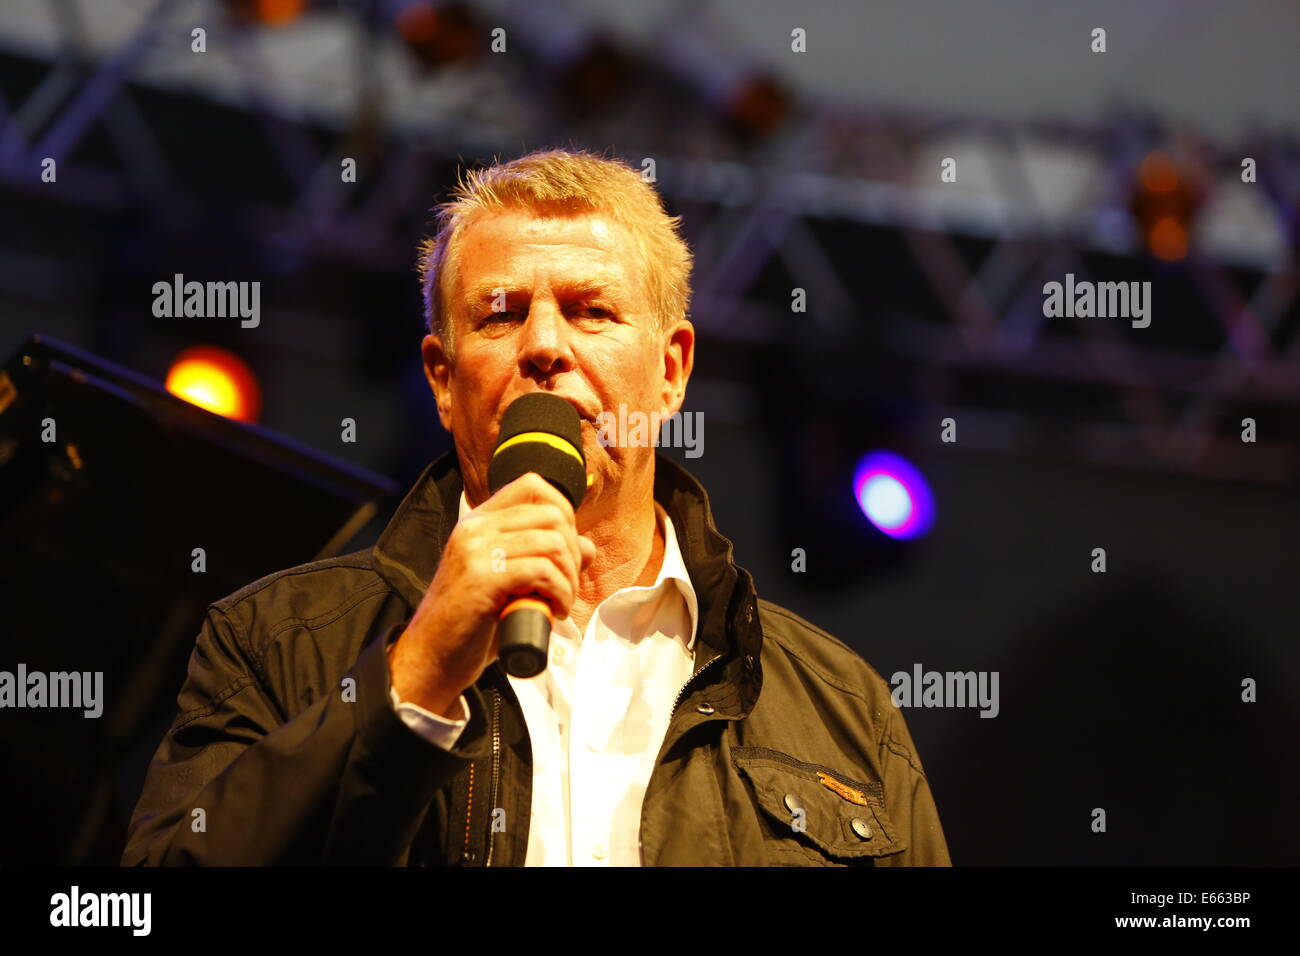 Worms, Germany. 15th August 2014. The Lord Mayor of Worms, Michael Kissel, addresses the audience. The 2014 Jazz and Joy Festival in Worms opened with a performance of regional Jazz musicians who have been selected especially for this performance by the artistic director of the festival. Credit:  Michael Debets/Alamy Live News Stock Photo